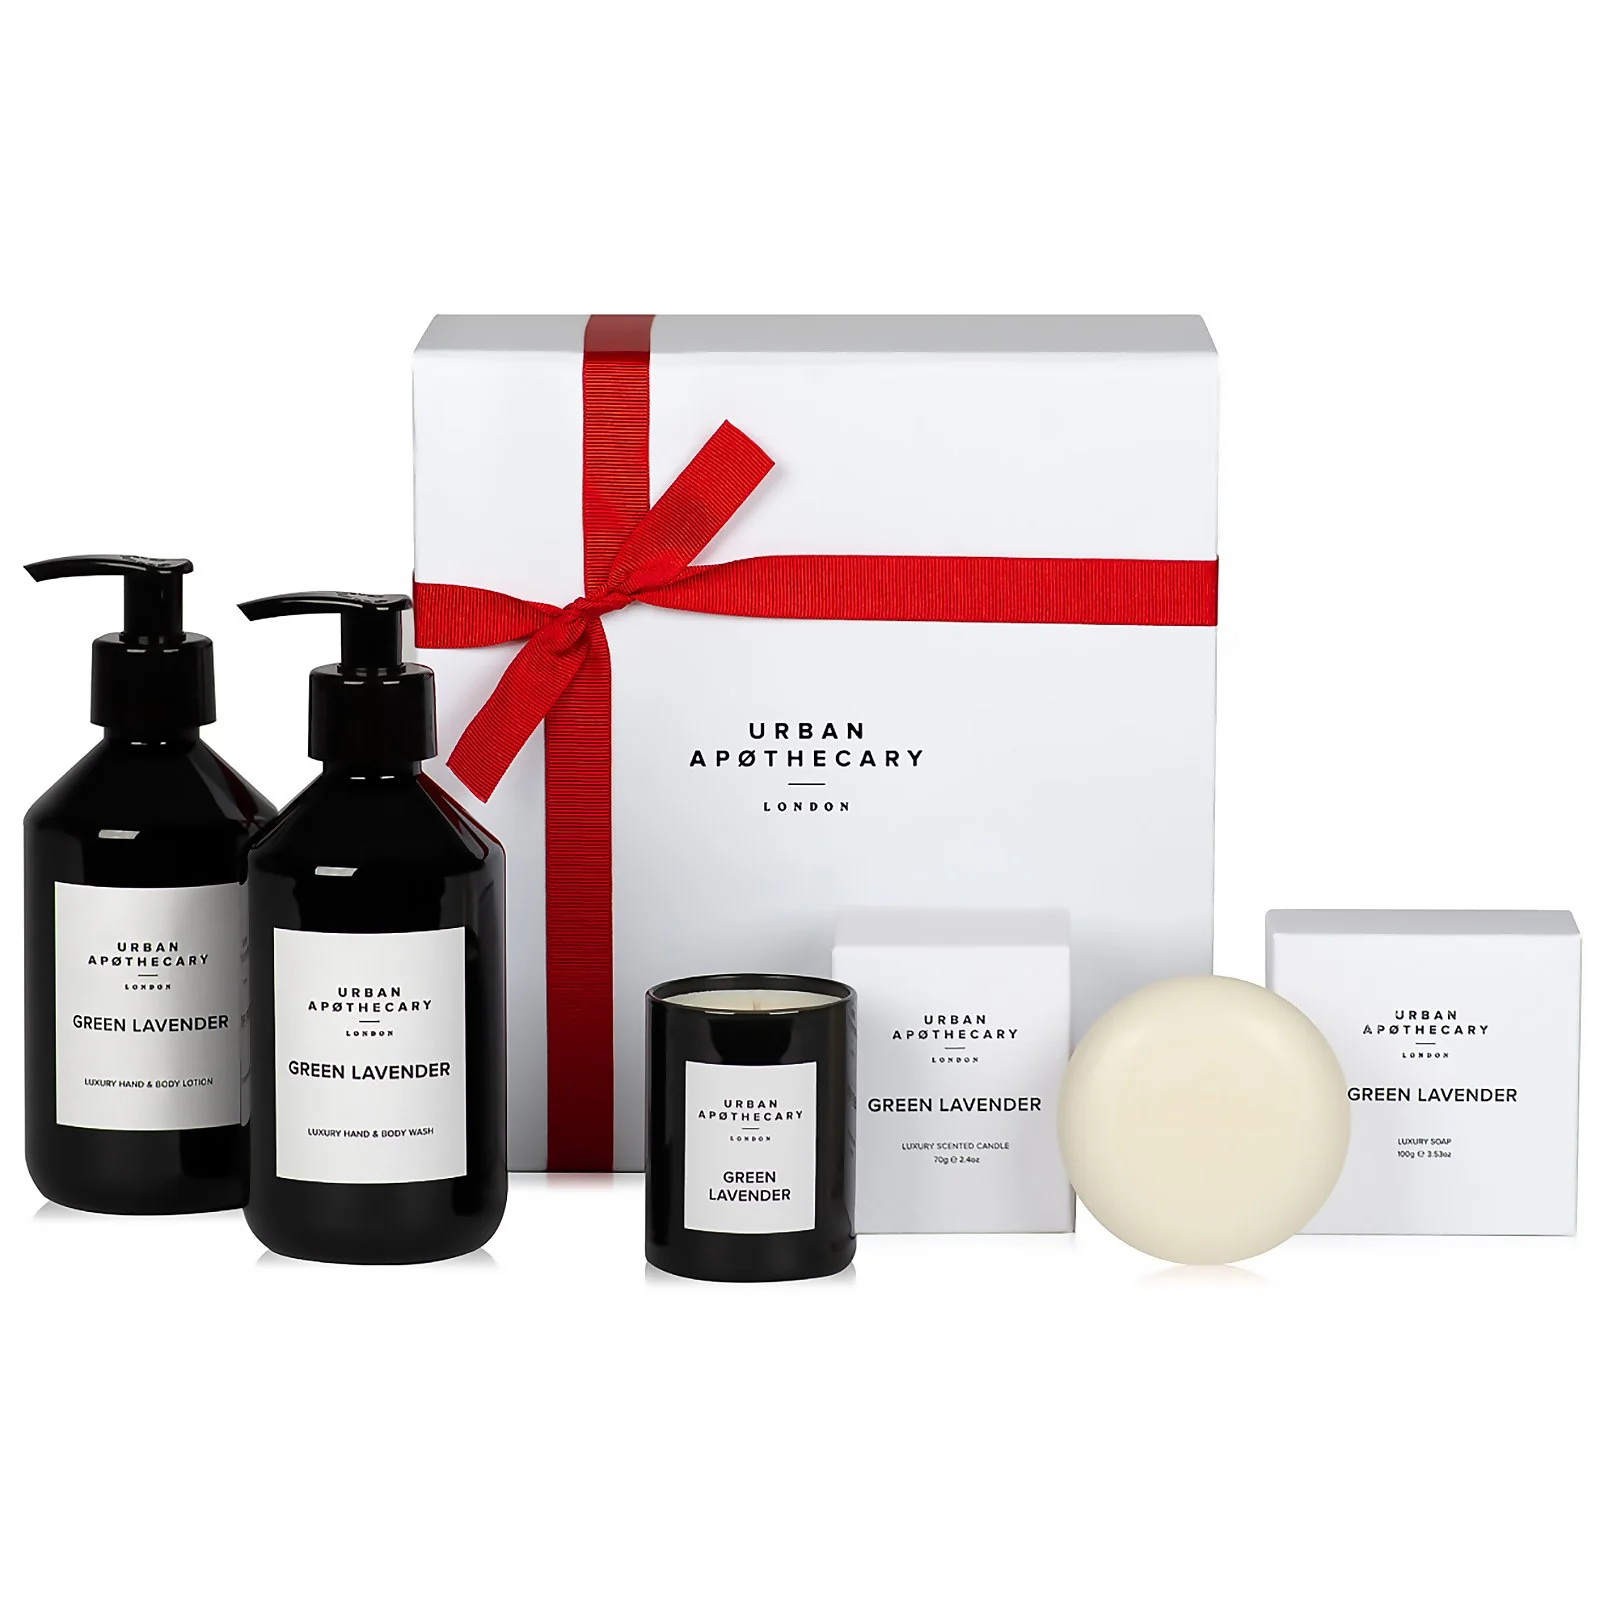 Urban Apothecary Green Lavender Luxury Bath and Body Gift Set (4 Pieces) Image 1